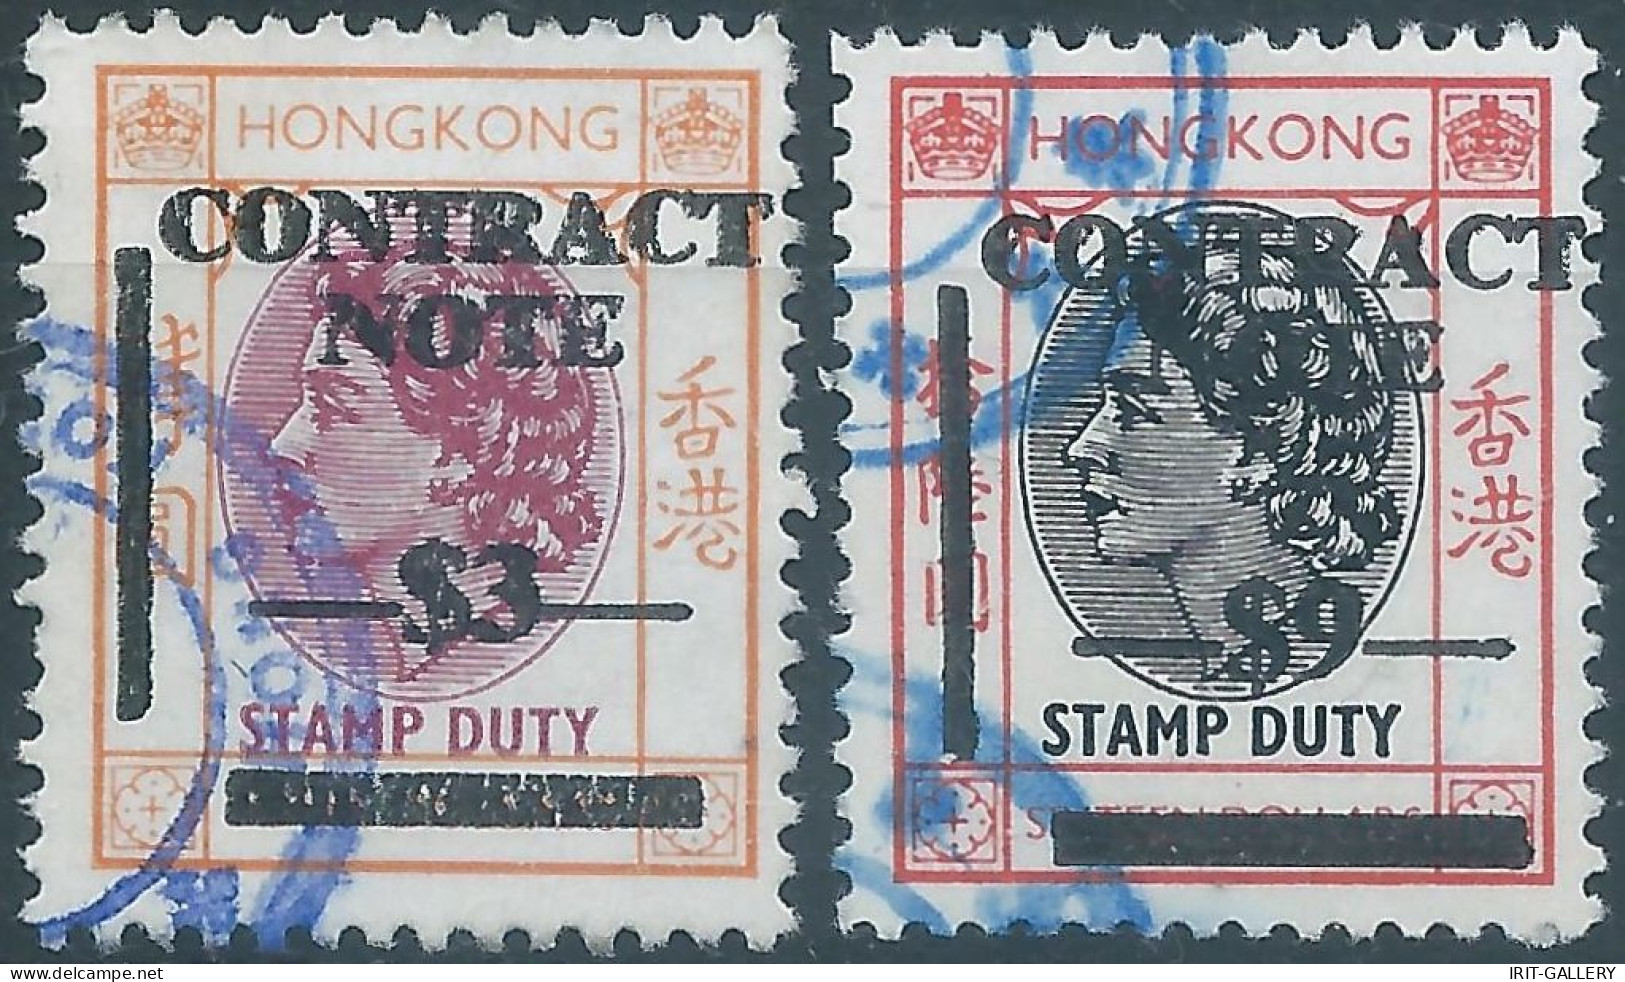 Great Britain-ENGLAND,HONG KONG Revenue Tax Fiscal  Stamp DUTY Contract Note, $3 & $9 , Obliterated - Postal Fiscal Stamps